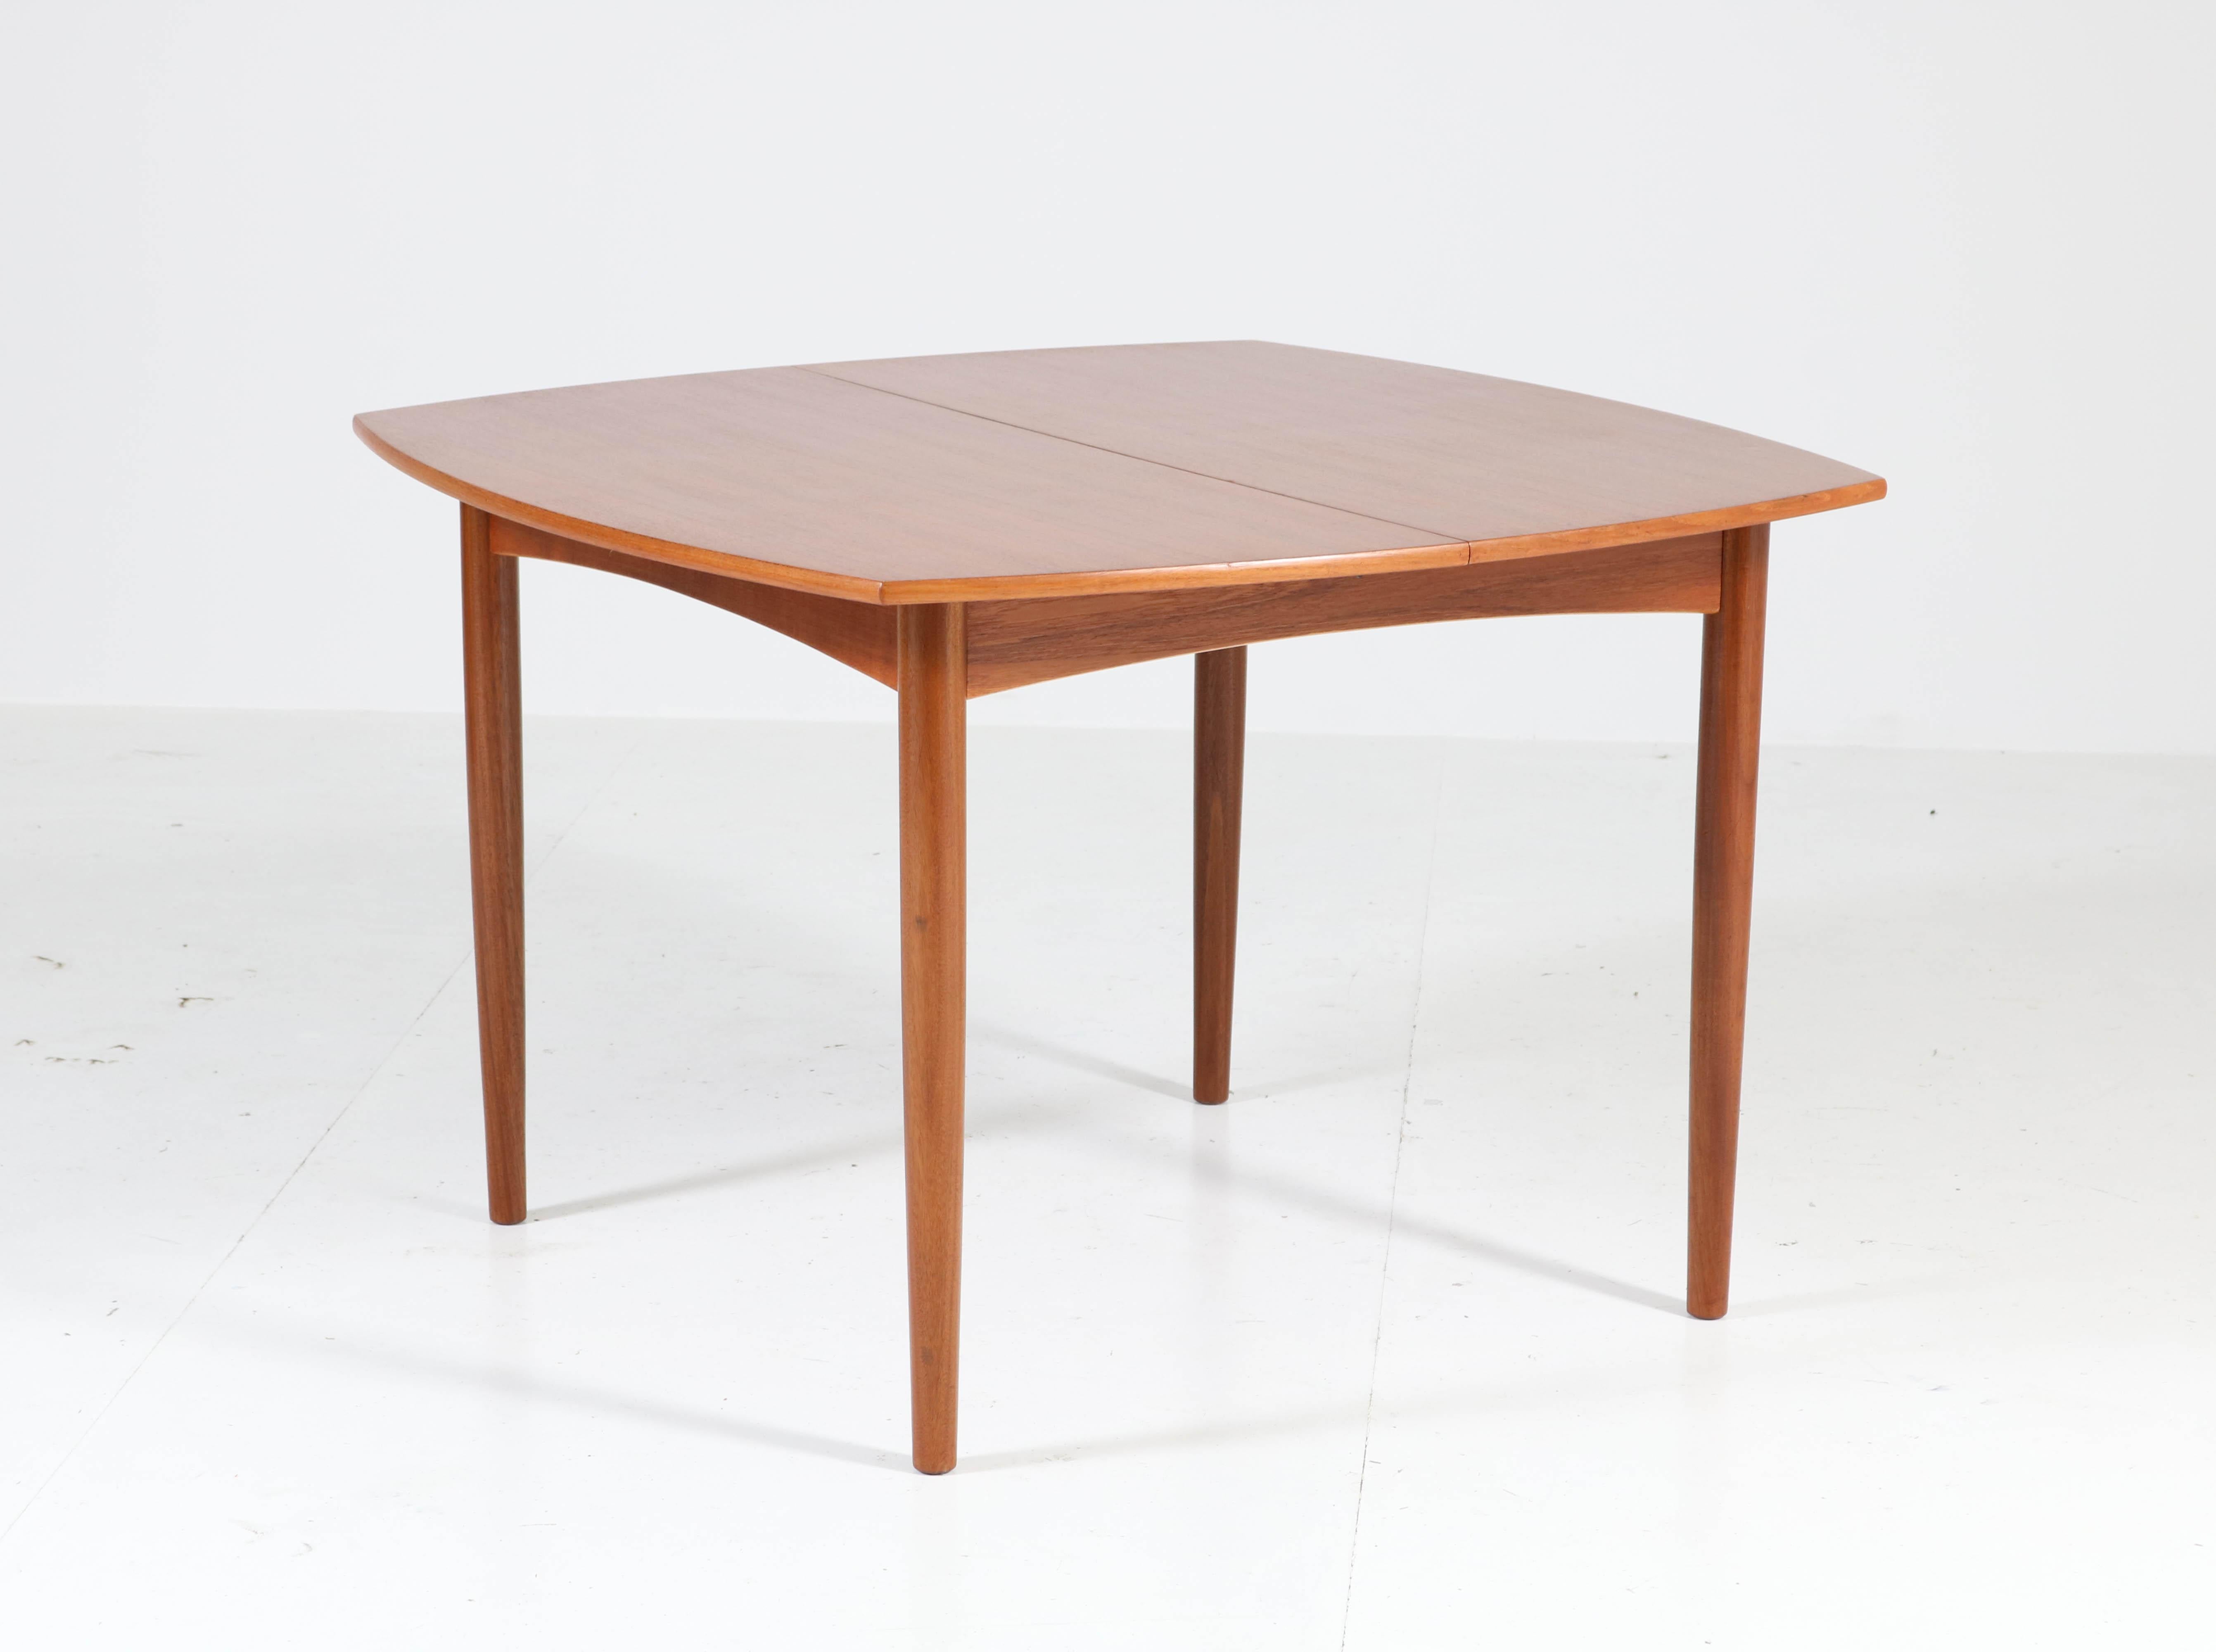 Dutch Mid-Century Modern Teak Extendable Dining Room Table by Cees Braakman for Pastoe